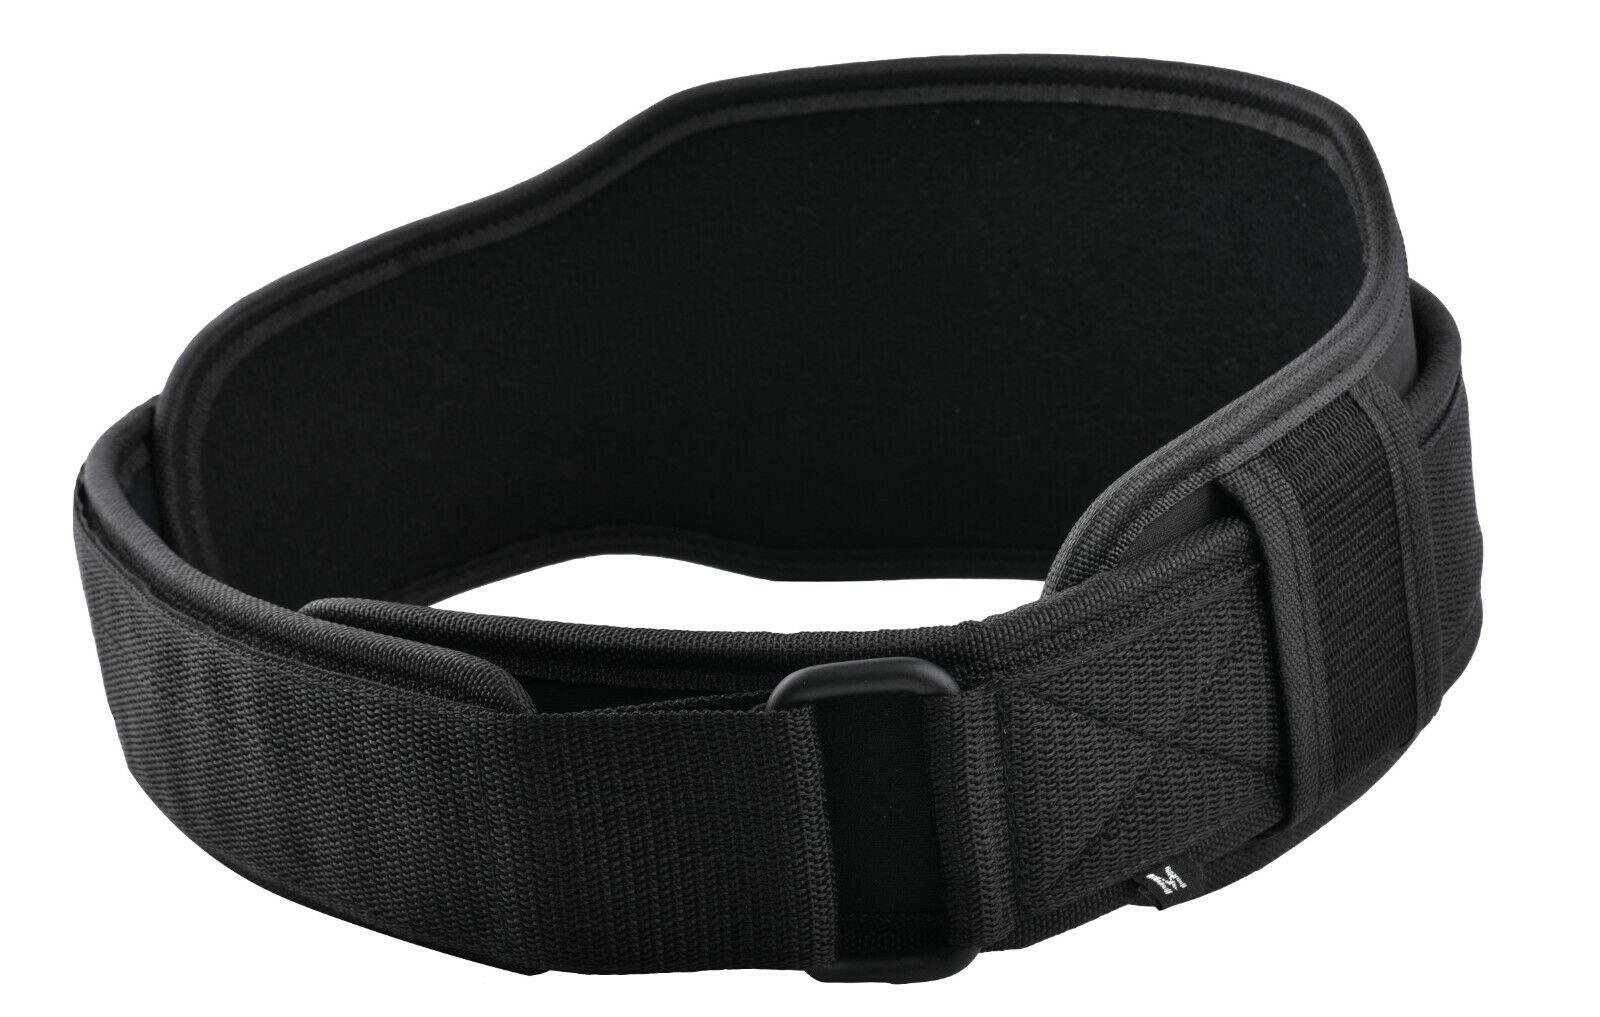 Small Black Weight Lifting Belt Gym Training Neoprene Fitness Workout Double Support